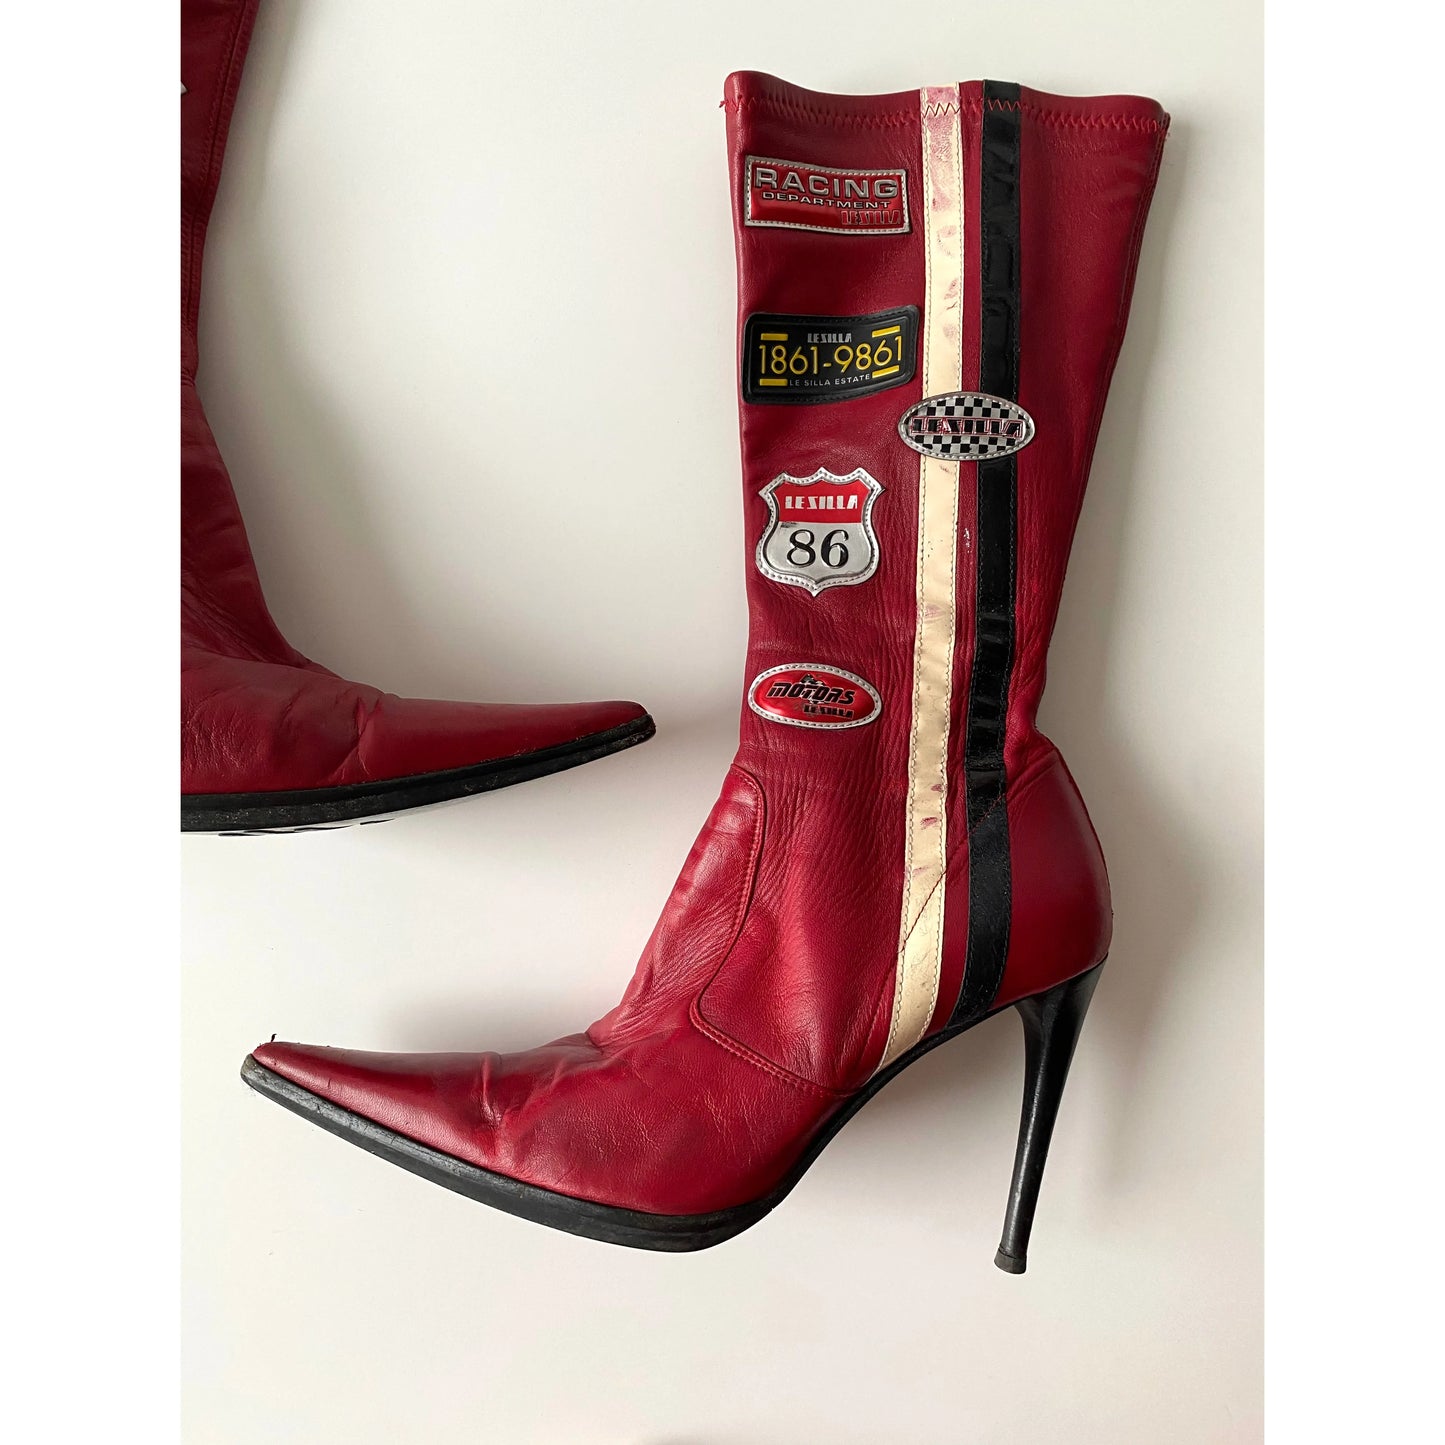 Le Silla Vintage Moto-Boots in Red (EU 39 / US 8)